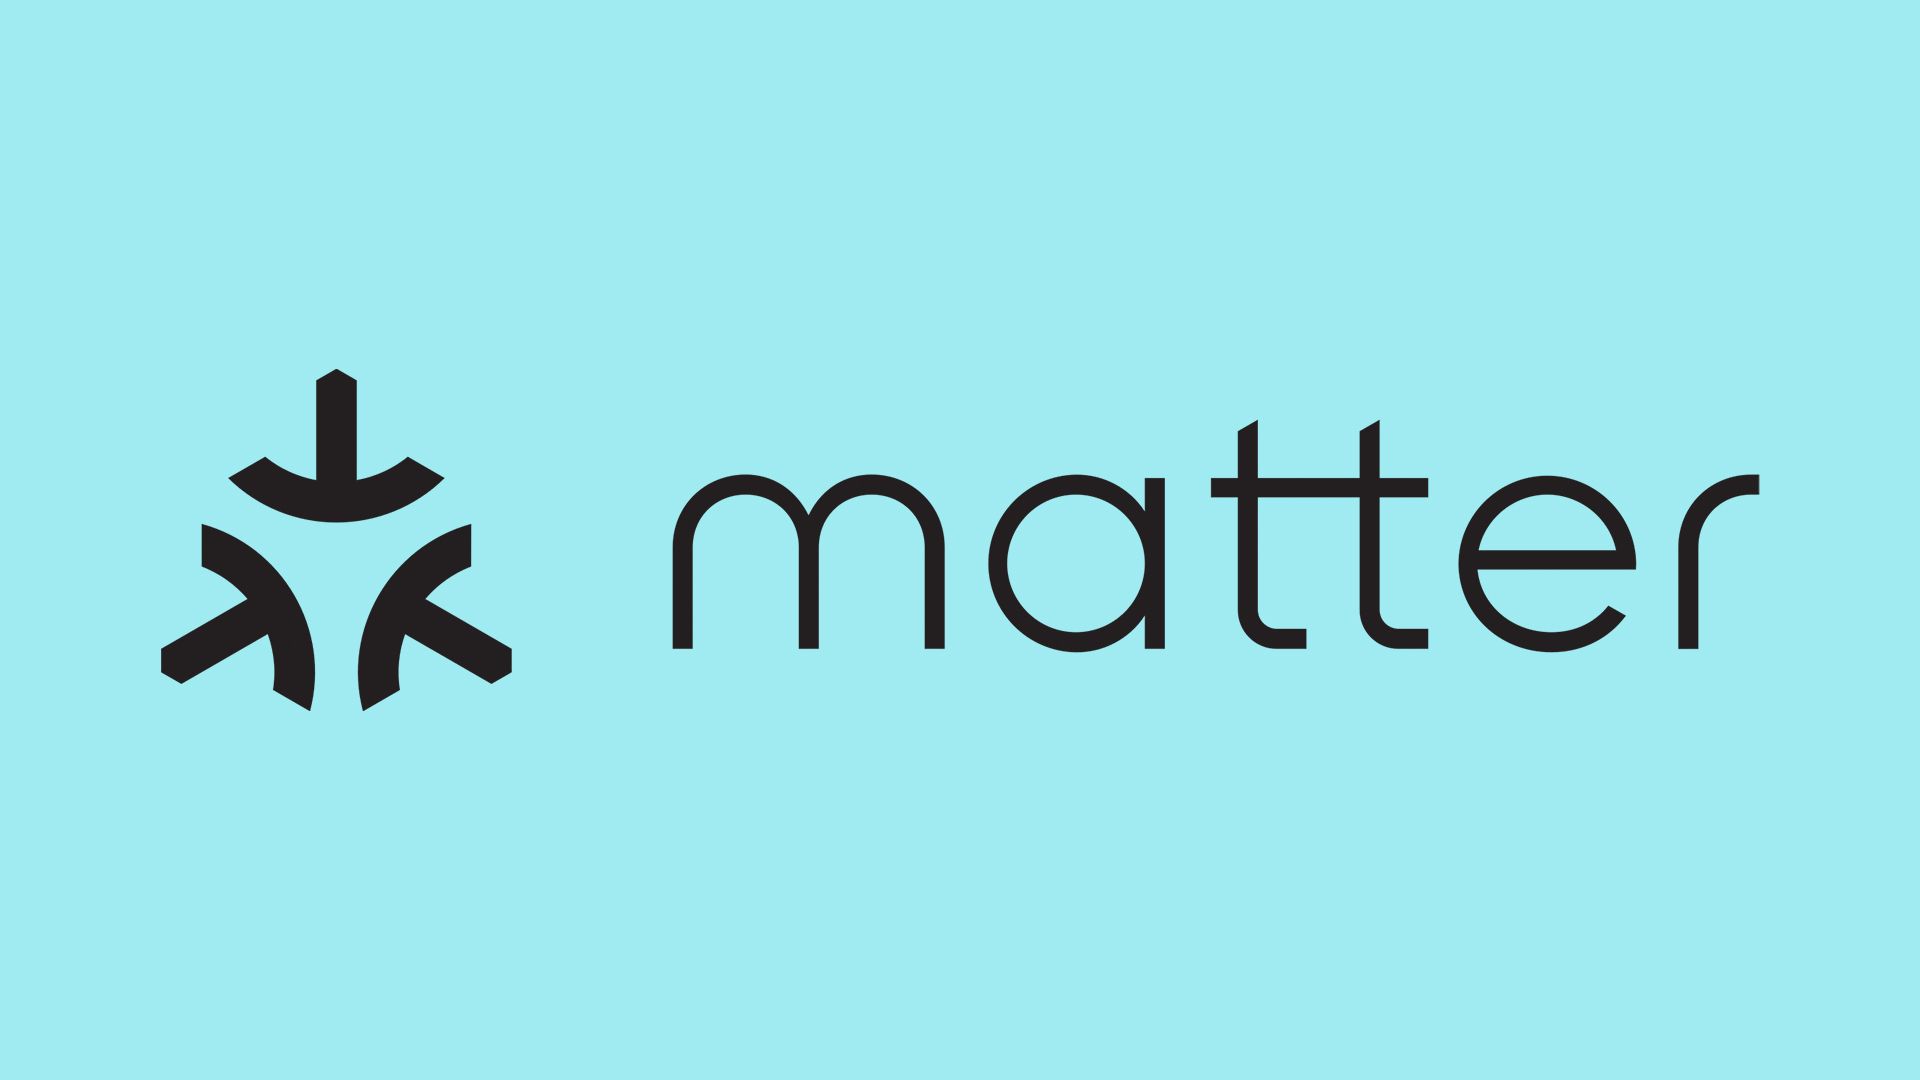 The Matter logo for interoperable smart devices